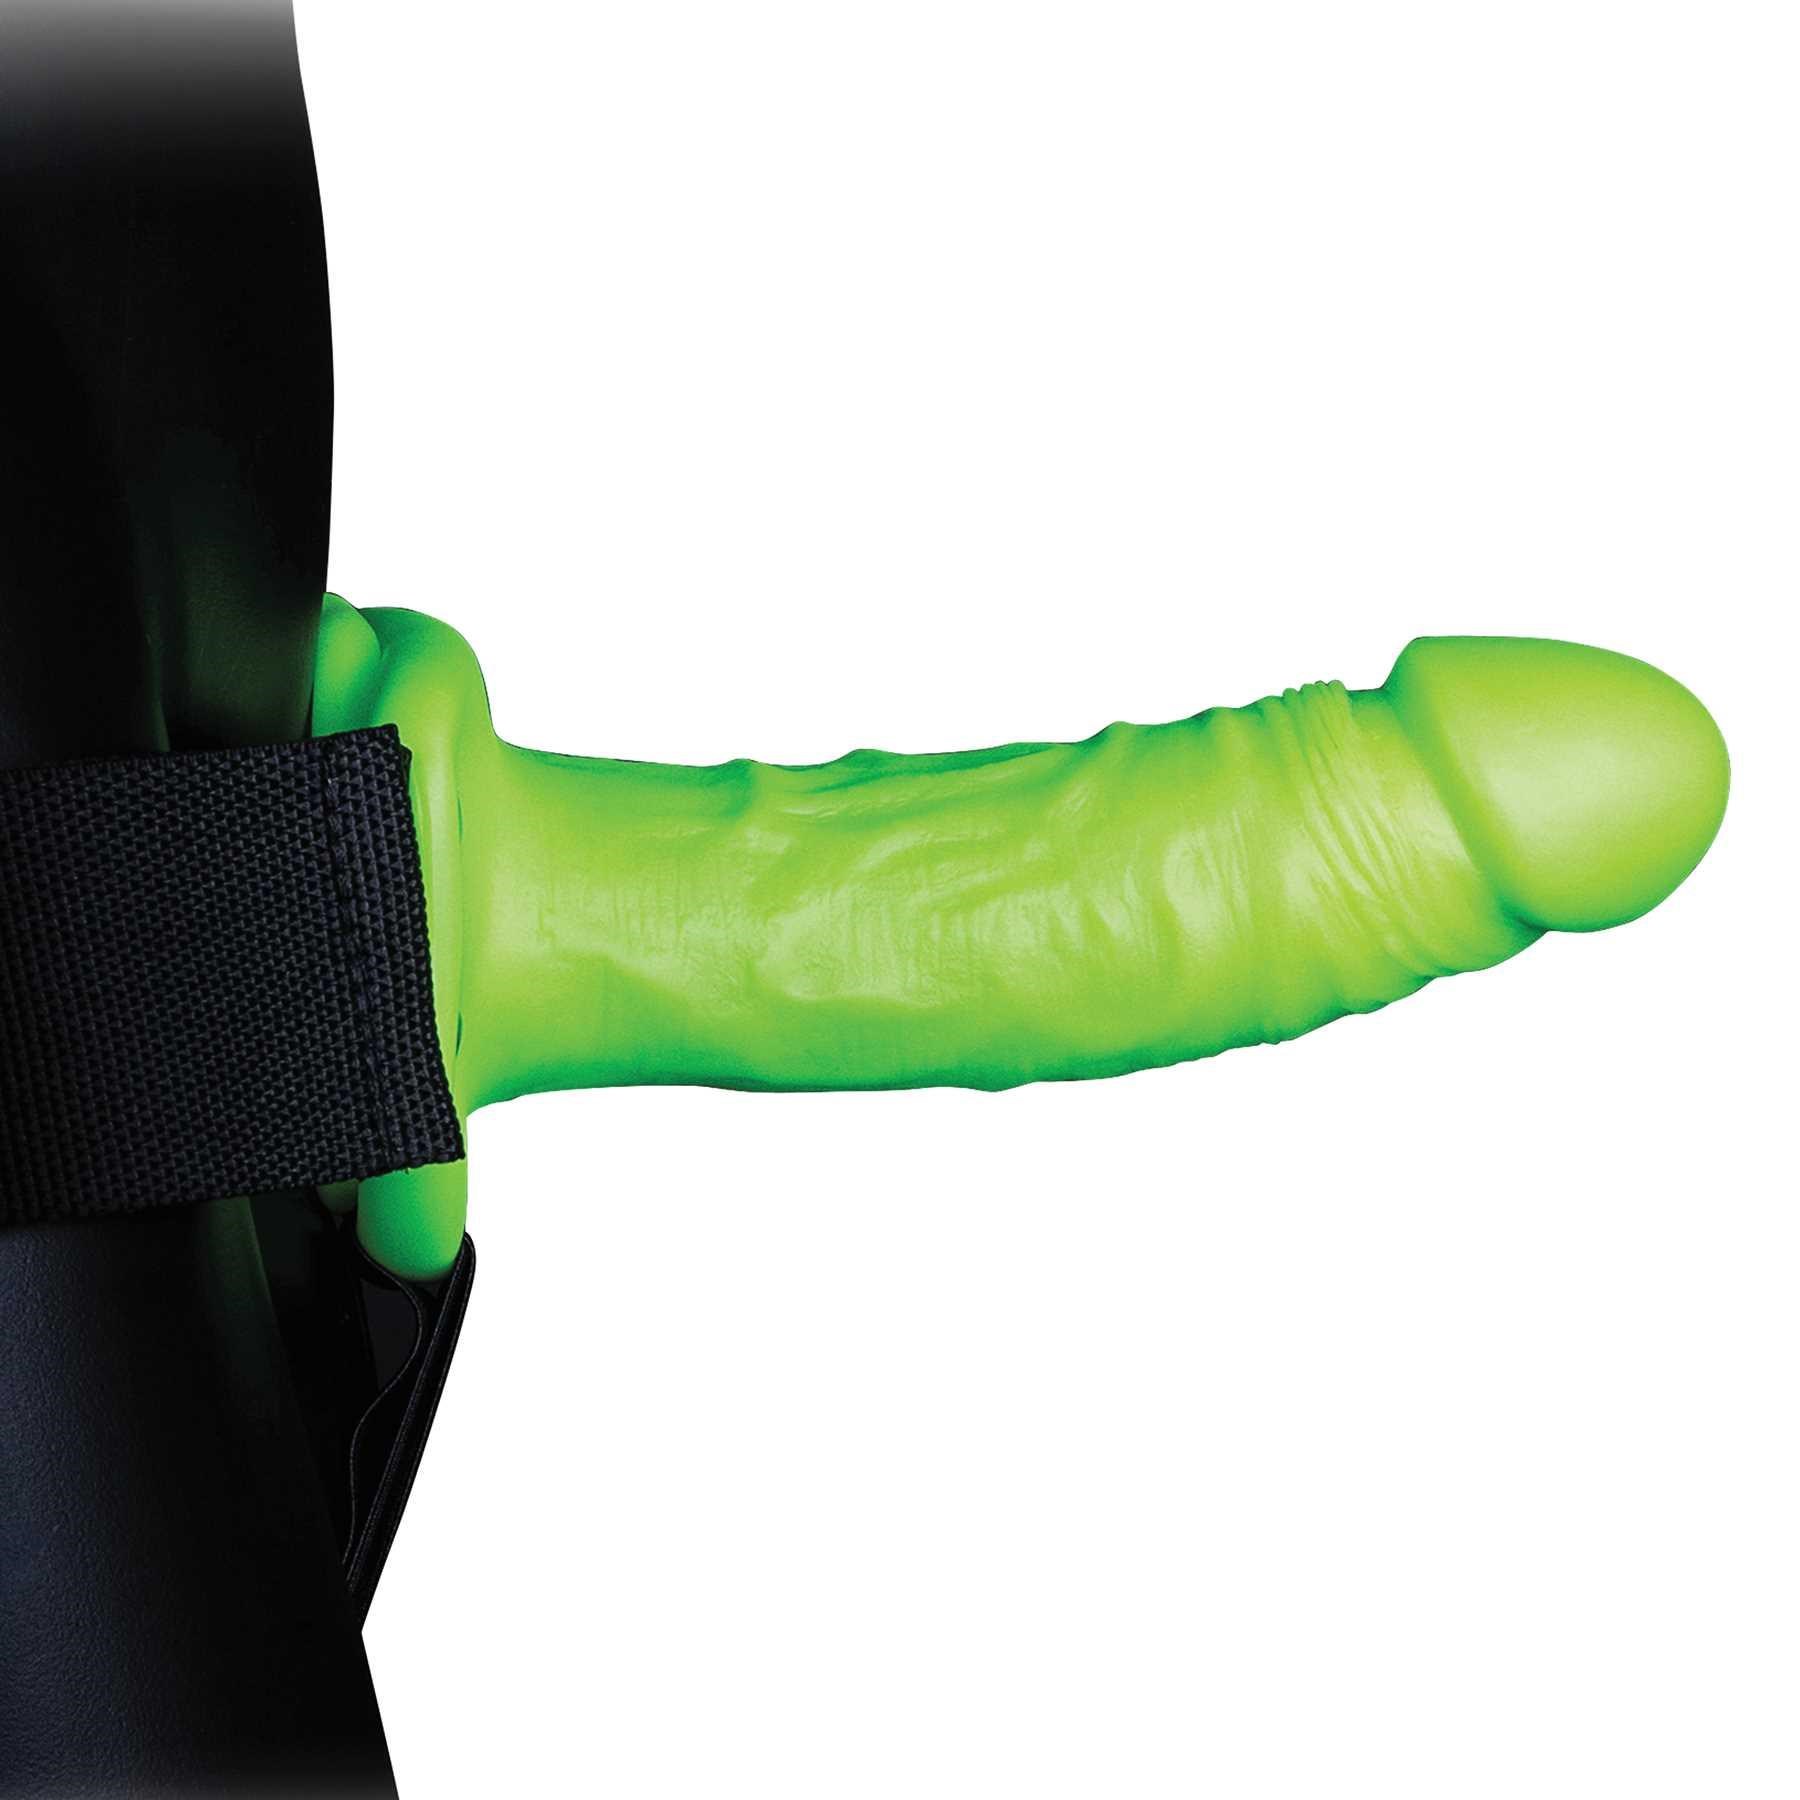 Ouch! Glow In The Dark Realistic 7 Inch Hollow Strap-On